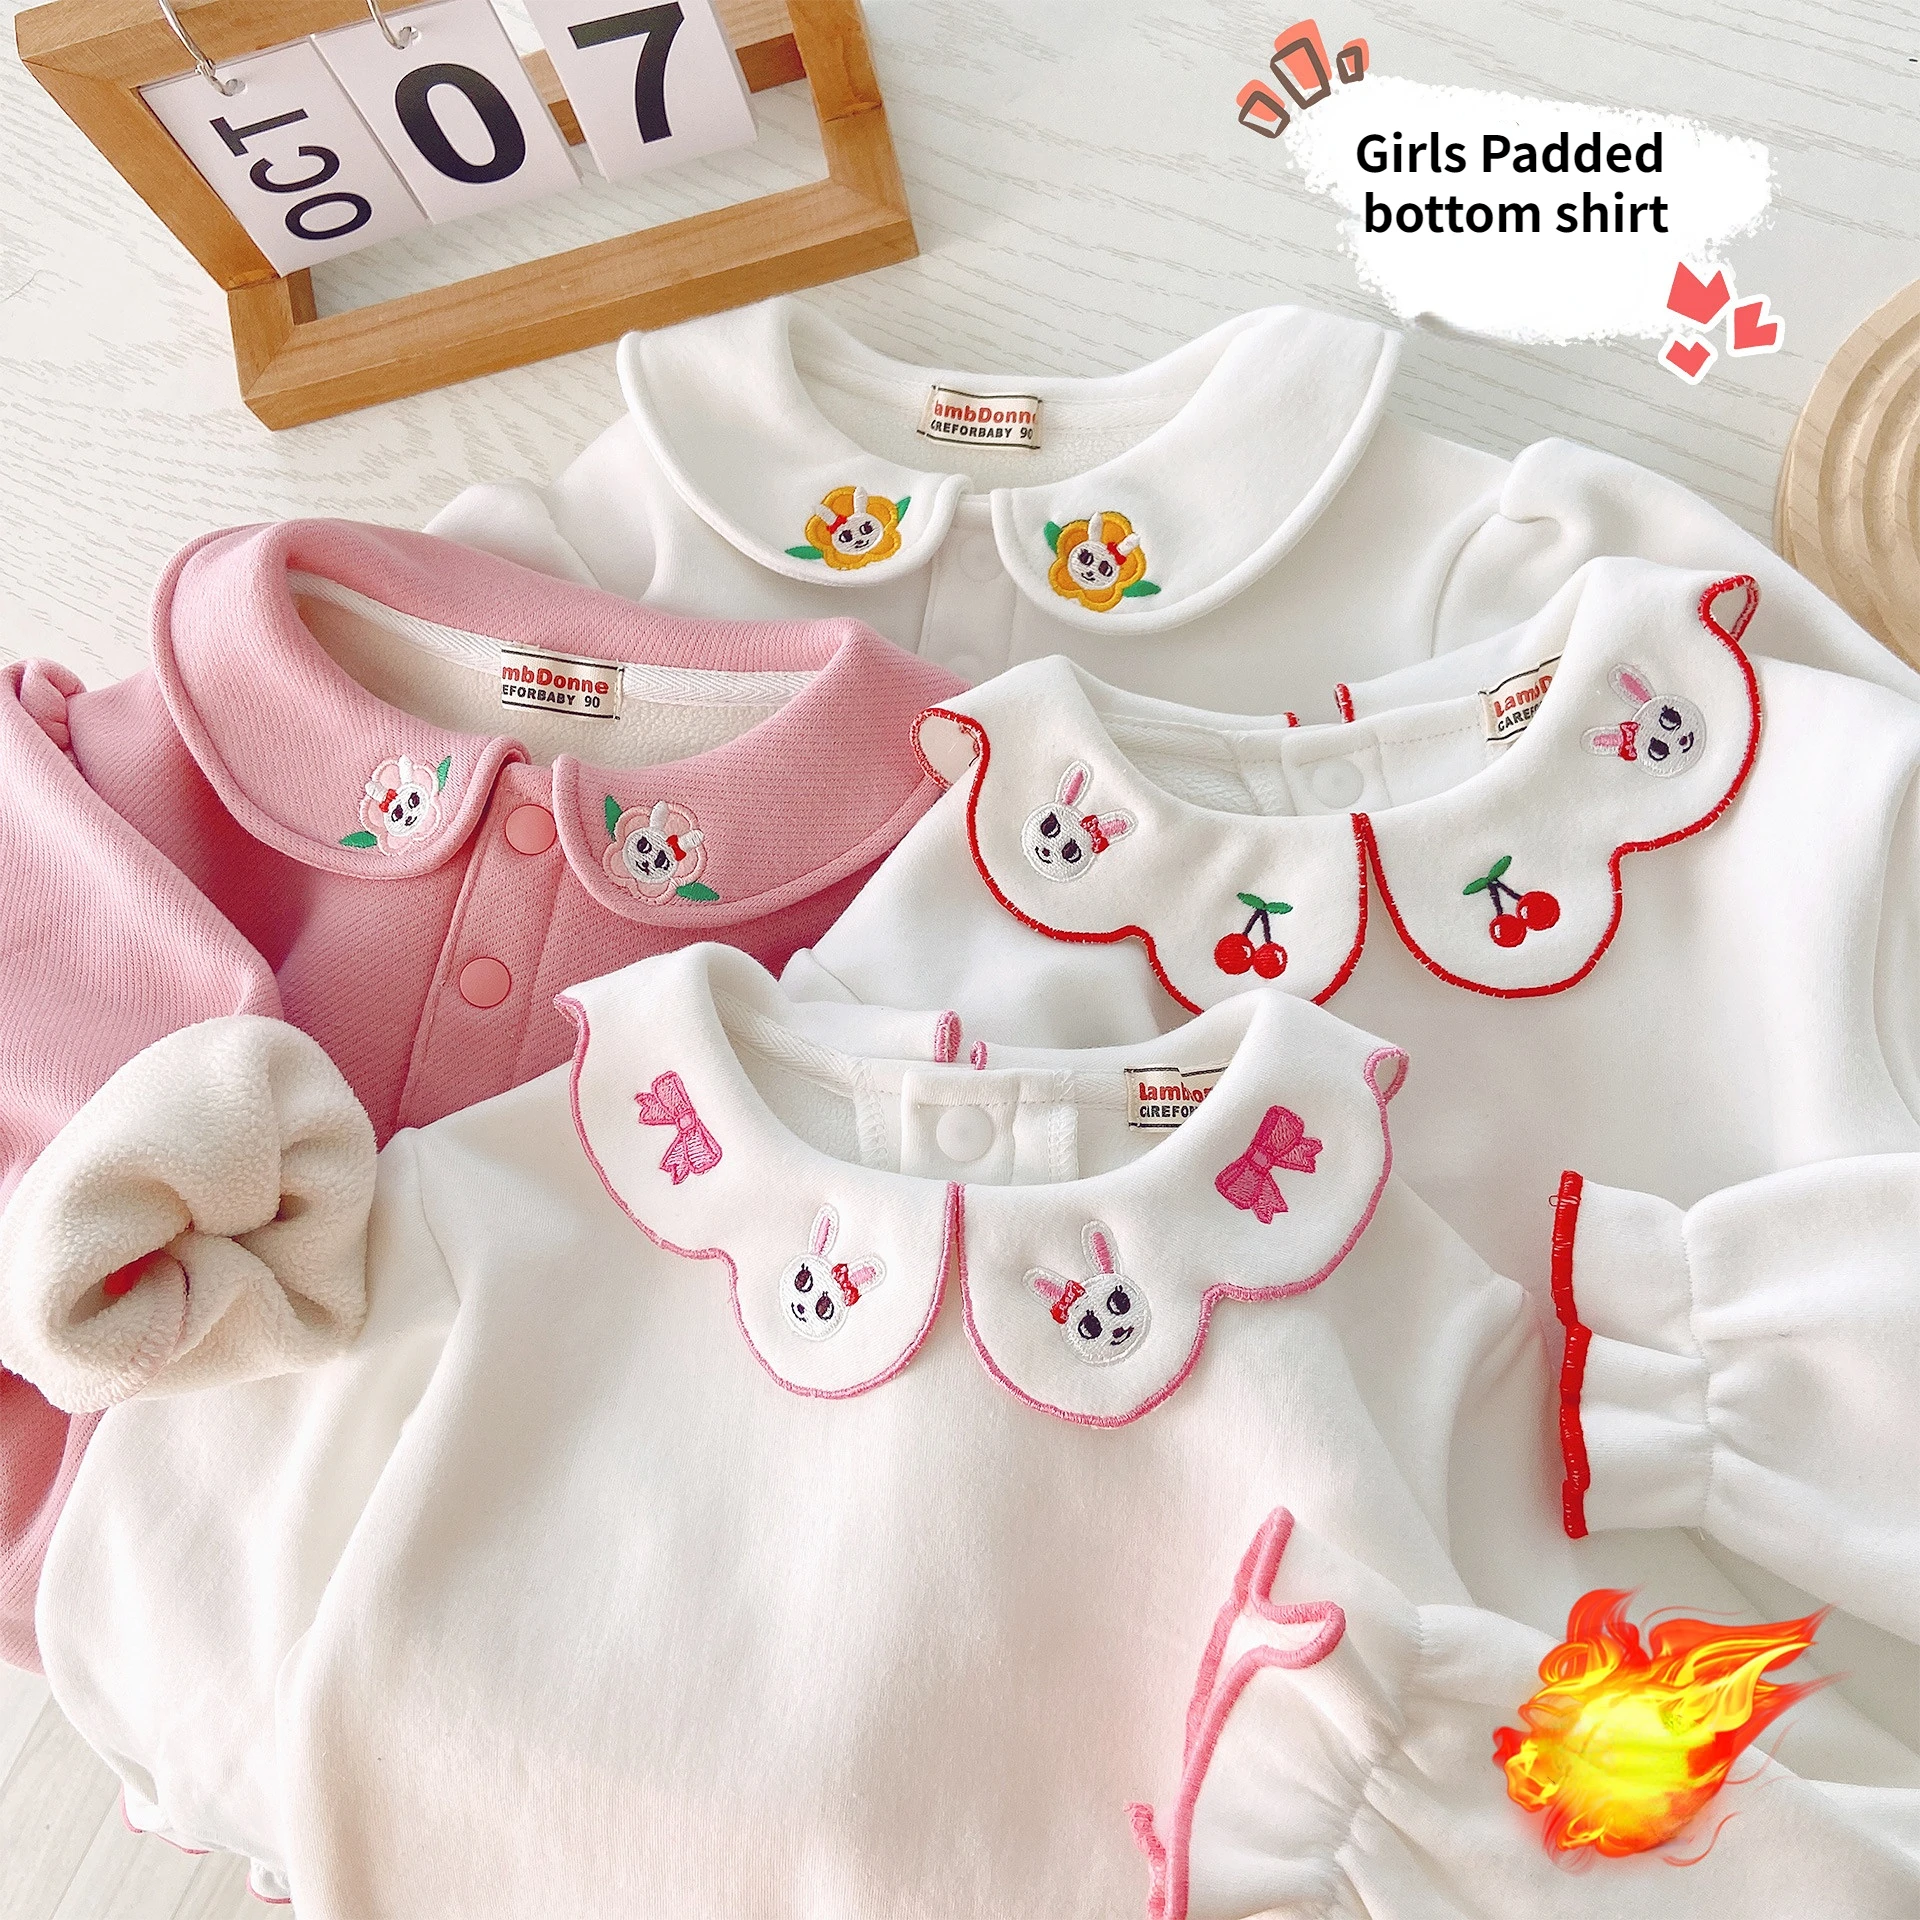 90-130cm Girl Bottoming Shirt Girl Padded Warm Tops Baby T-shirts Kids Clothes Girls Cherry Embroidery Pattern Lapel Neck Top